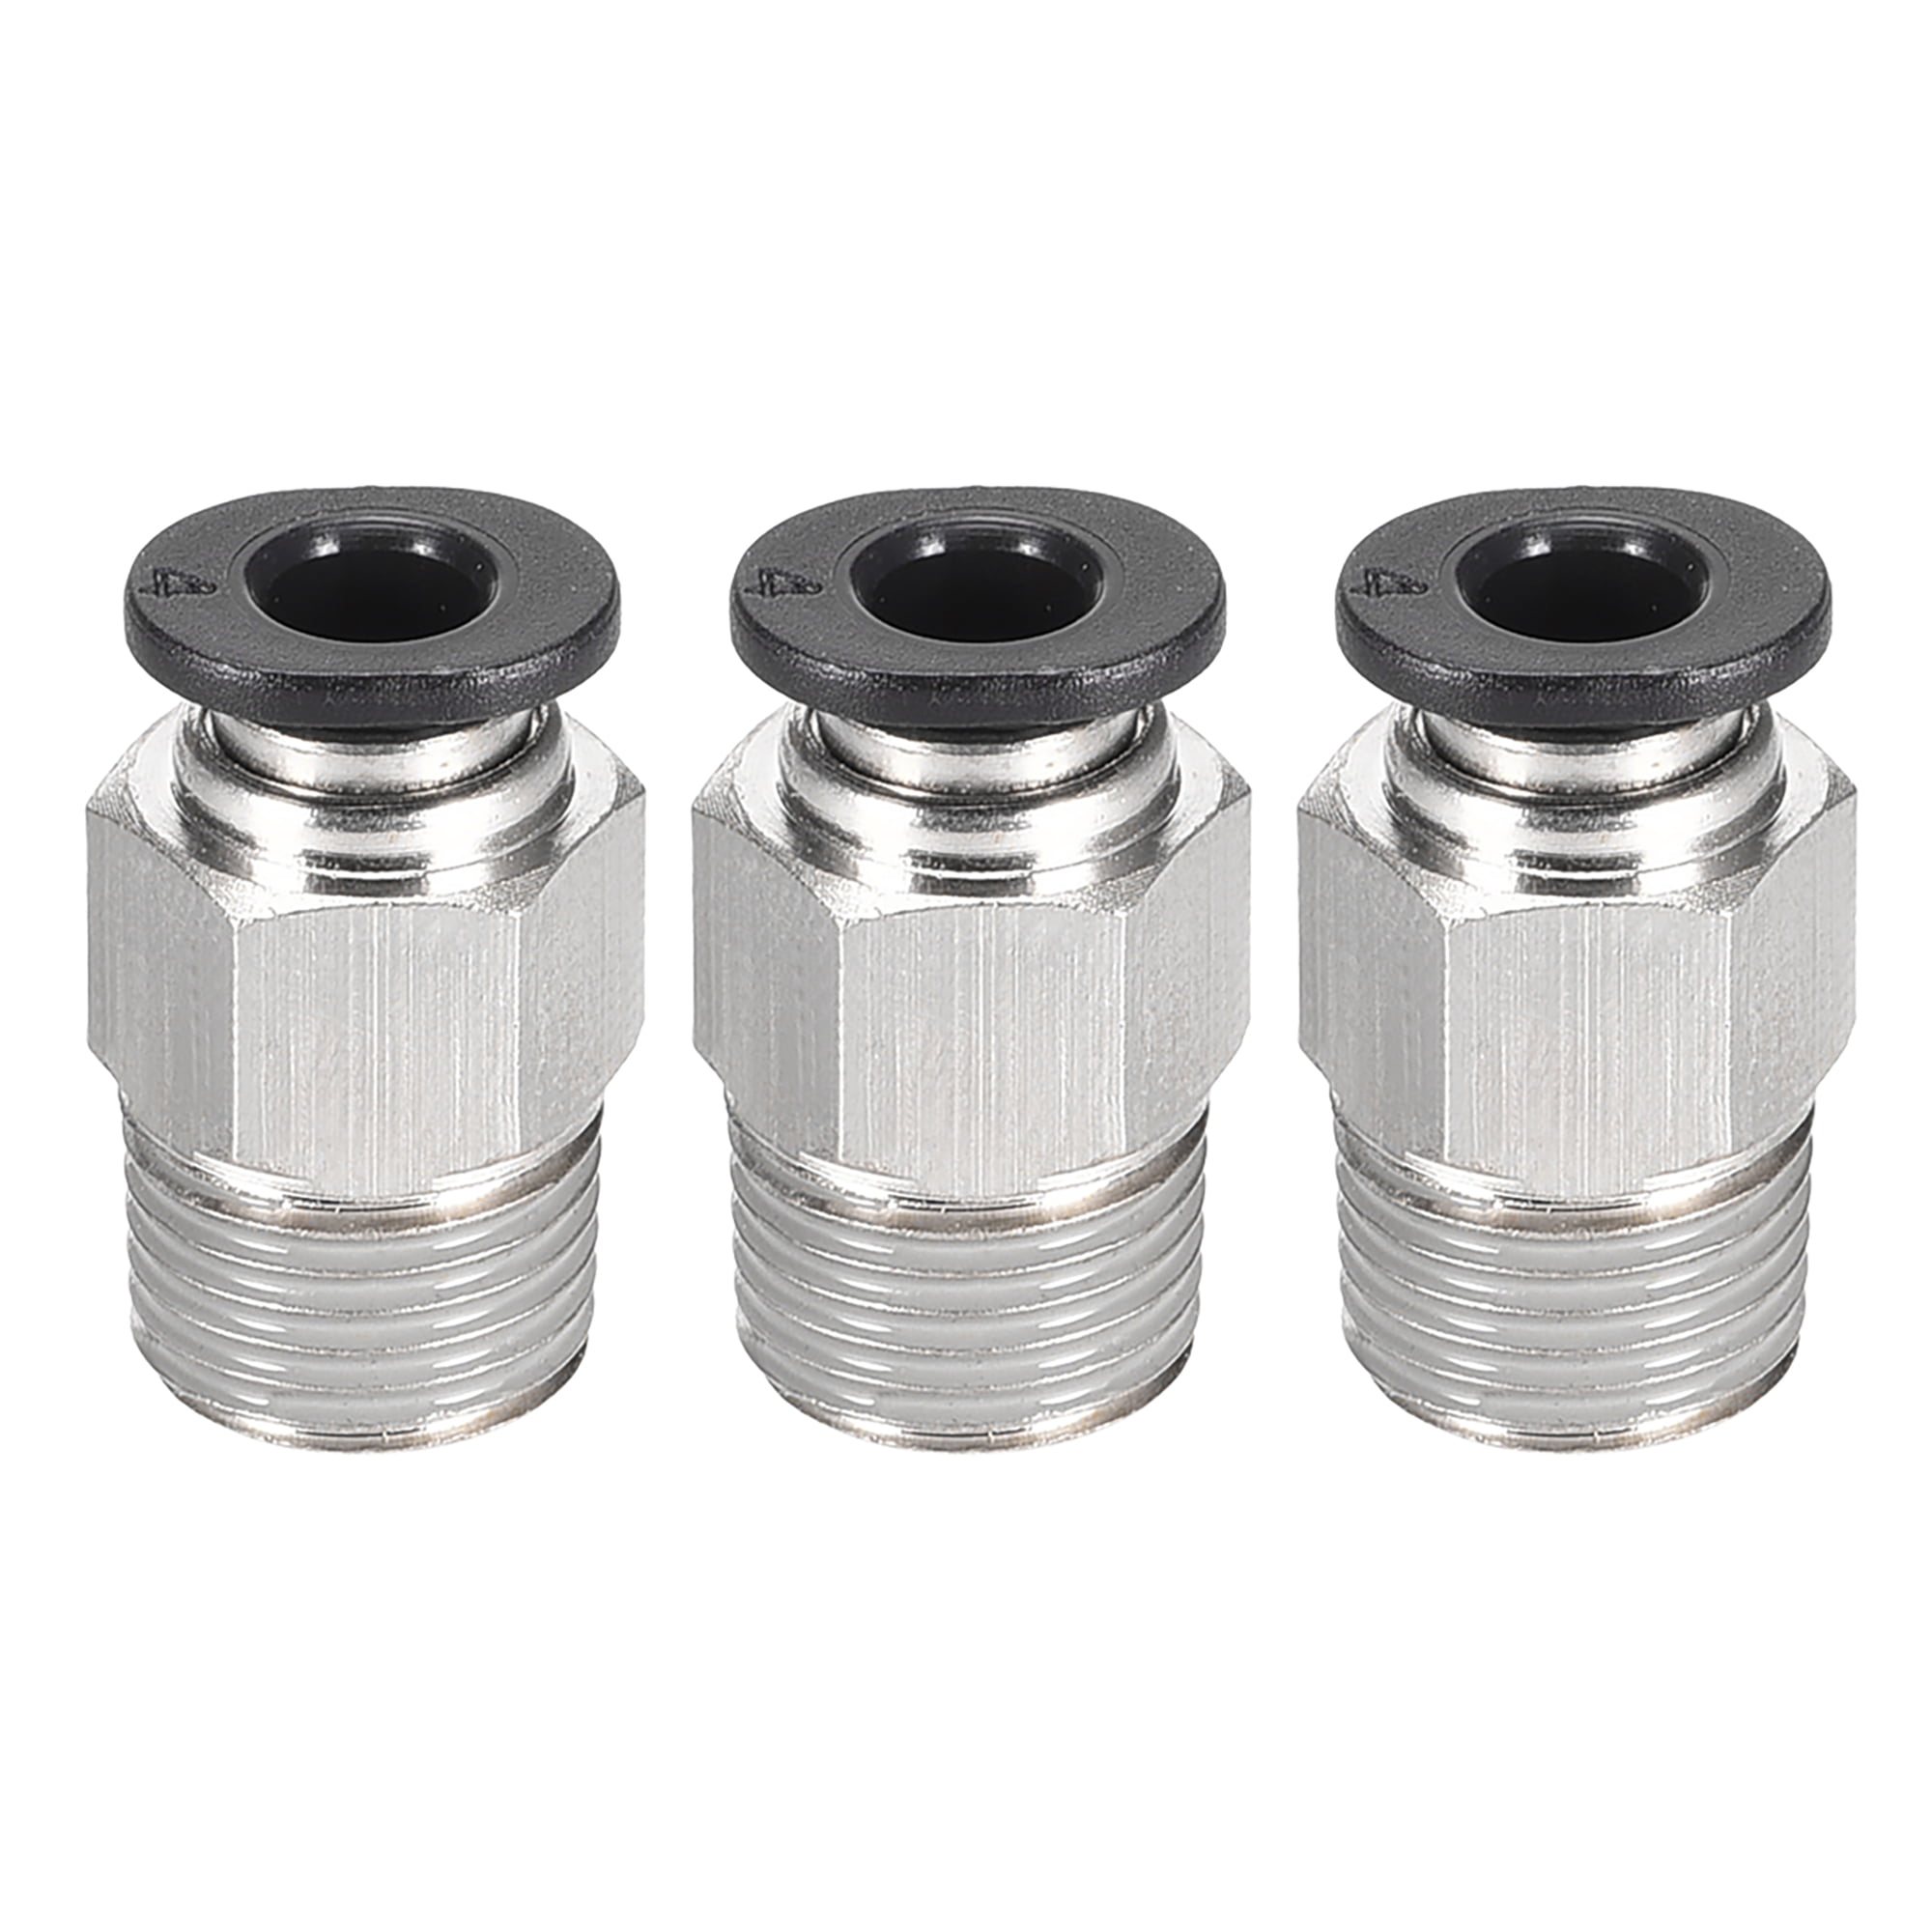 5 X Air Pneumatic Push In Straight Gas Fittings Plastic Quick Fitting Connectors 